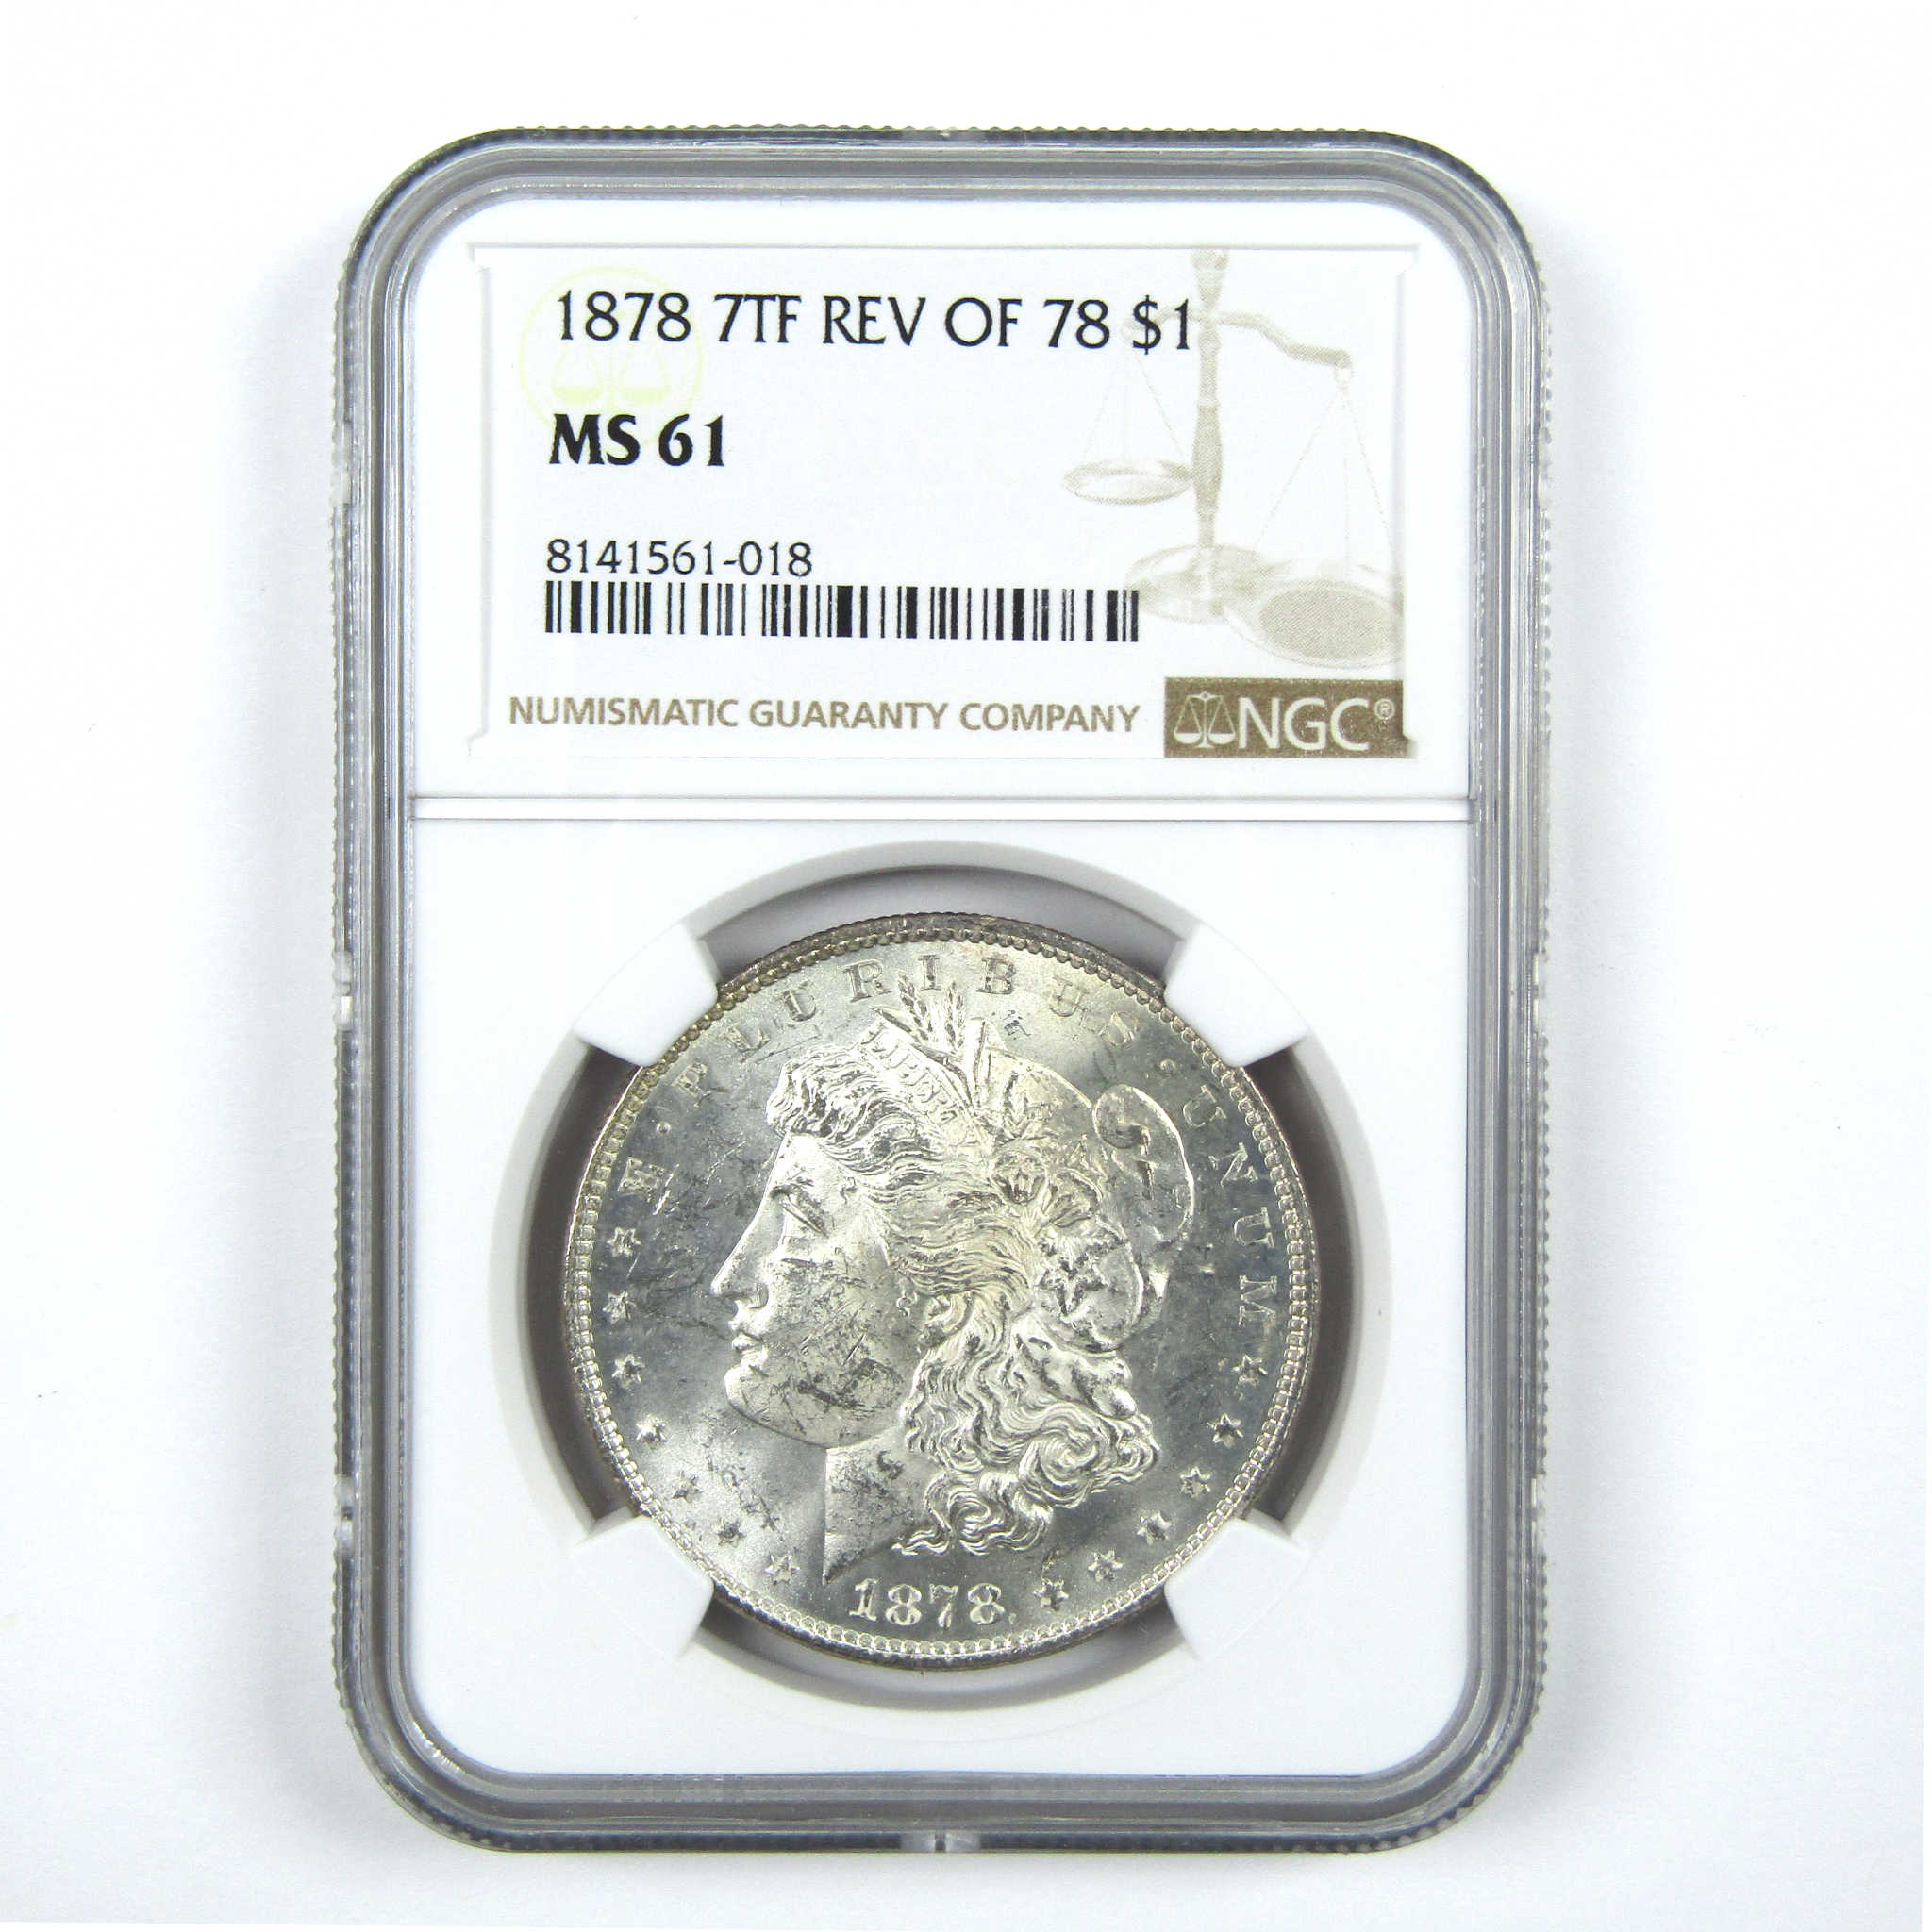 1878 7TF Rev 78 Morgan Dollar MS 61 NGC Uncirculated SKU:I14029 - Morgan coin - Morgan silver dollar - Morgan silver dollar for sale - Profile Coins &amp; Collectibles